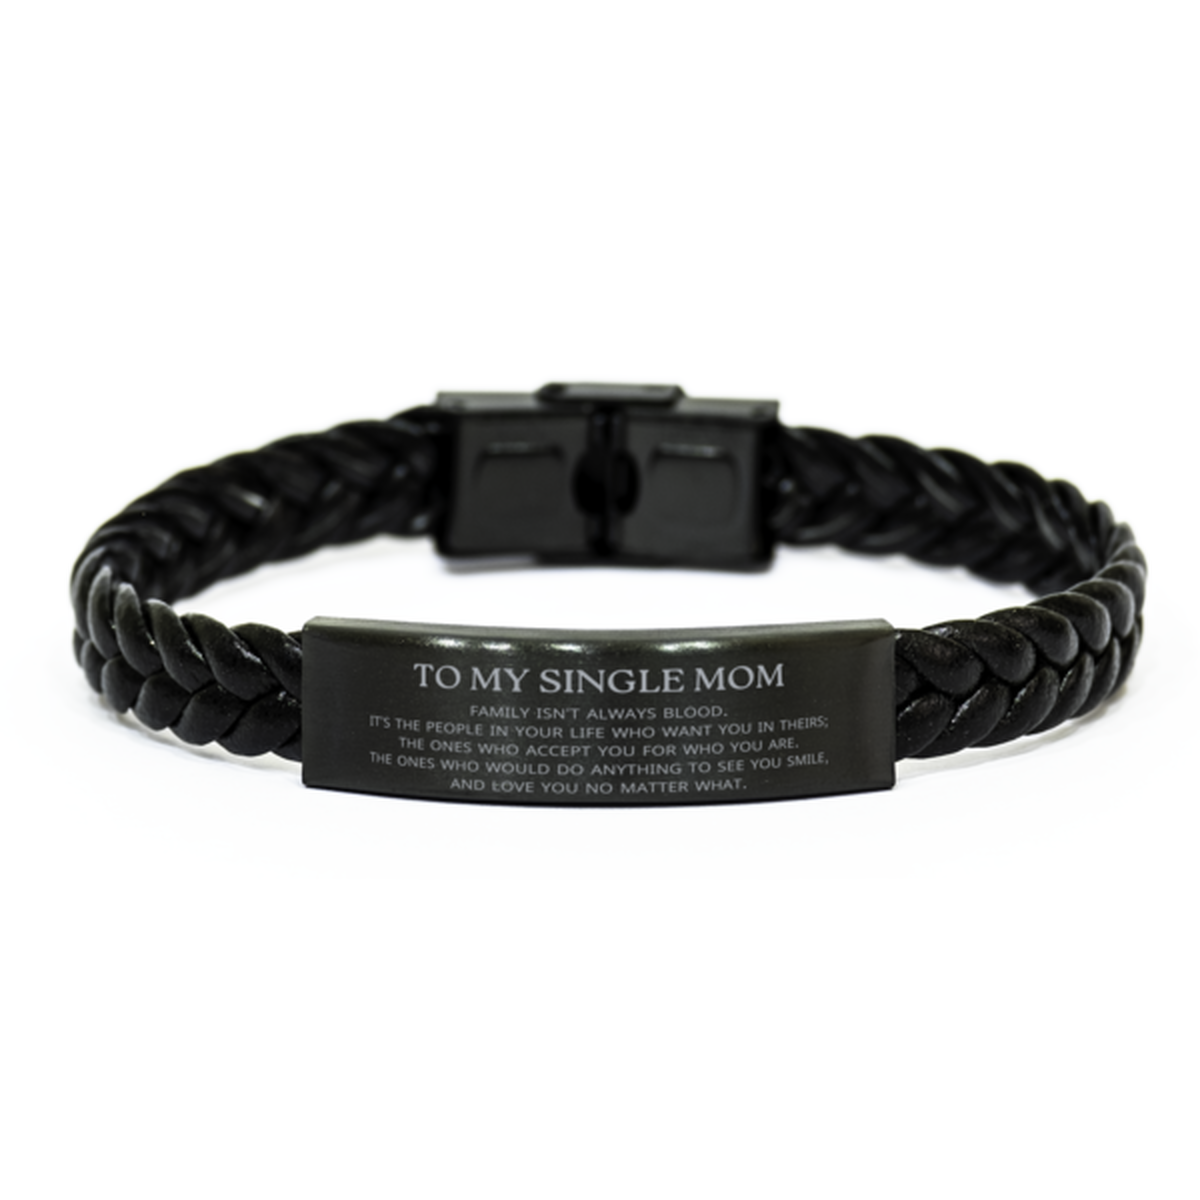 To My Single Mom Gifts, Family isn't always blood, Single Mom Braided Leather Bracelet, Birthday Christmas Unique Present For Single Mom